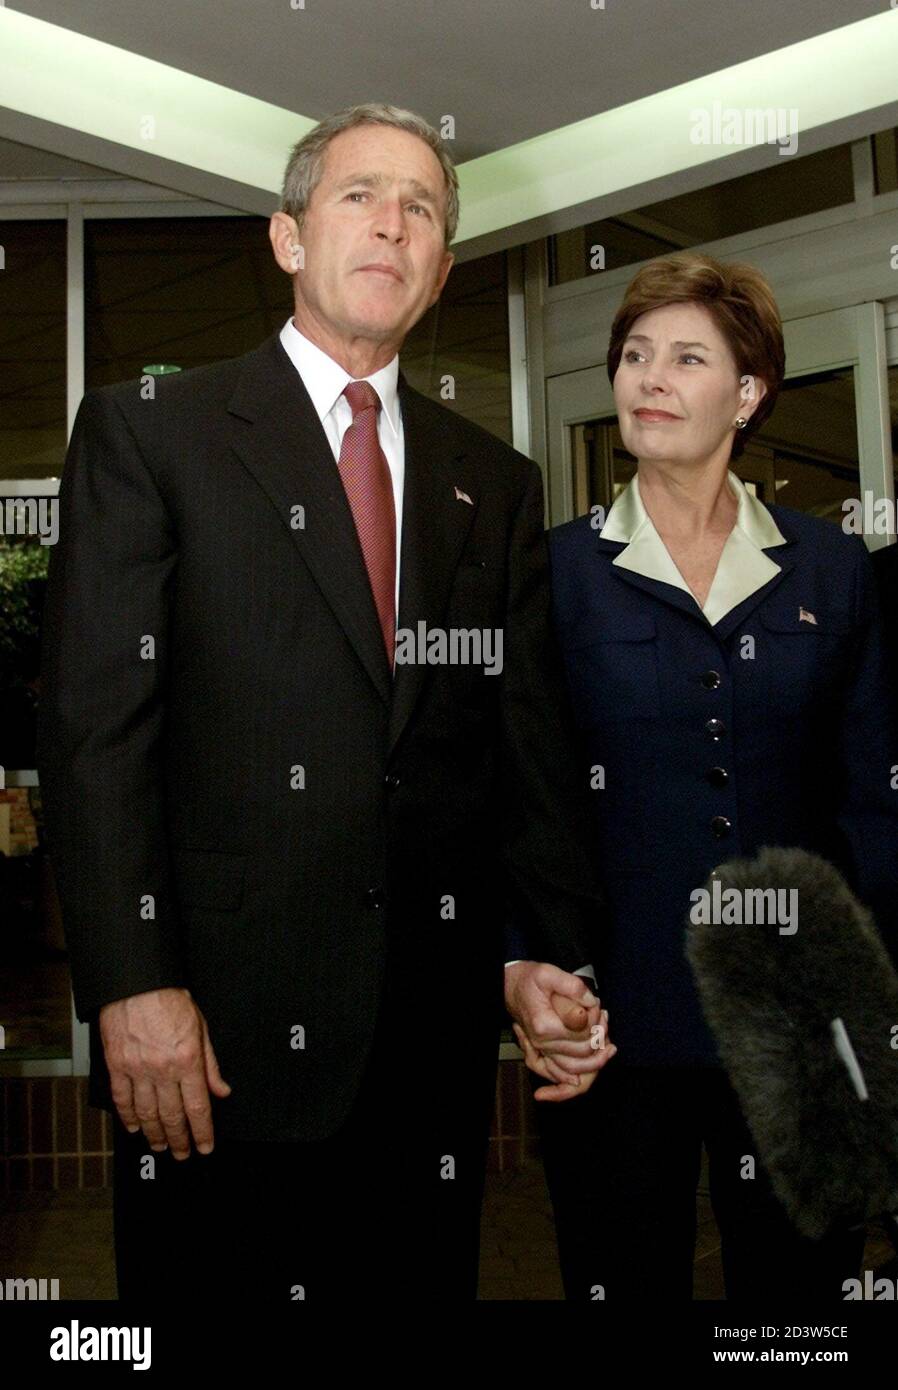 U.S. President George W. Bush and first lady Laura Bush leave Washington Hospital Center September 13, 2001 after paying a visit to some of the most serious victims of the Pentagon attack. Bush told injured Pentagon workers that the country was praying for them, and praised the doctors and nurses caring for victims of Tuesday's terrorist attack. REUTERS/Kevin Lamarque  KL/ME Stock Photo